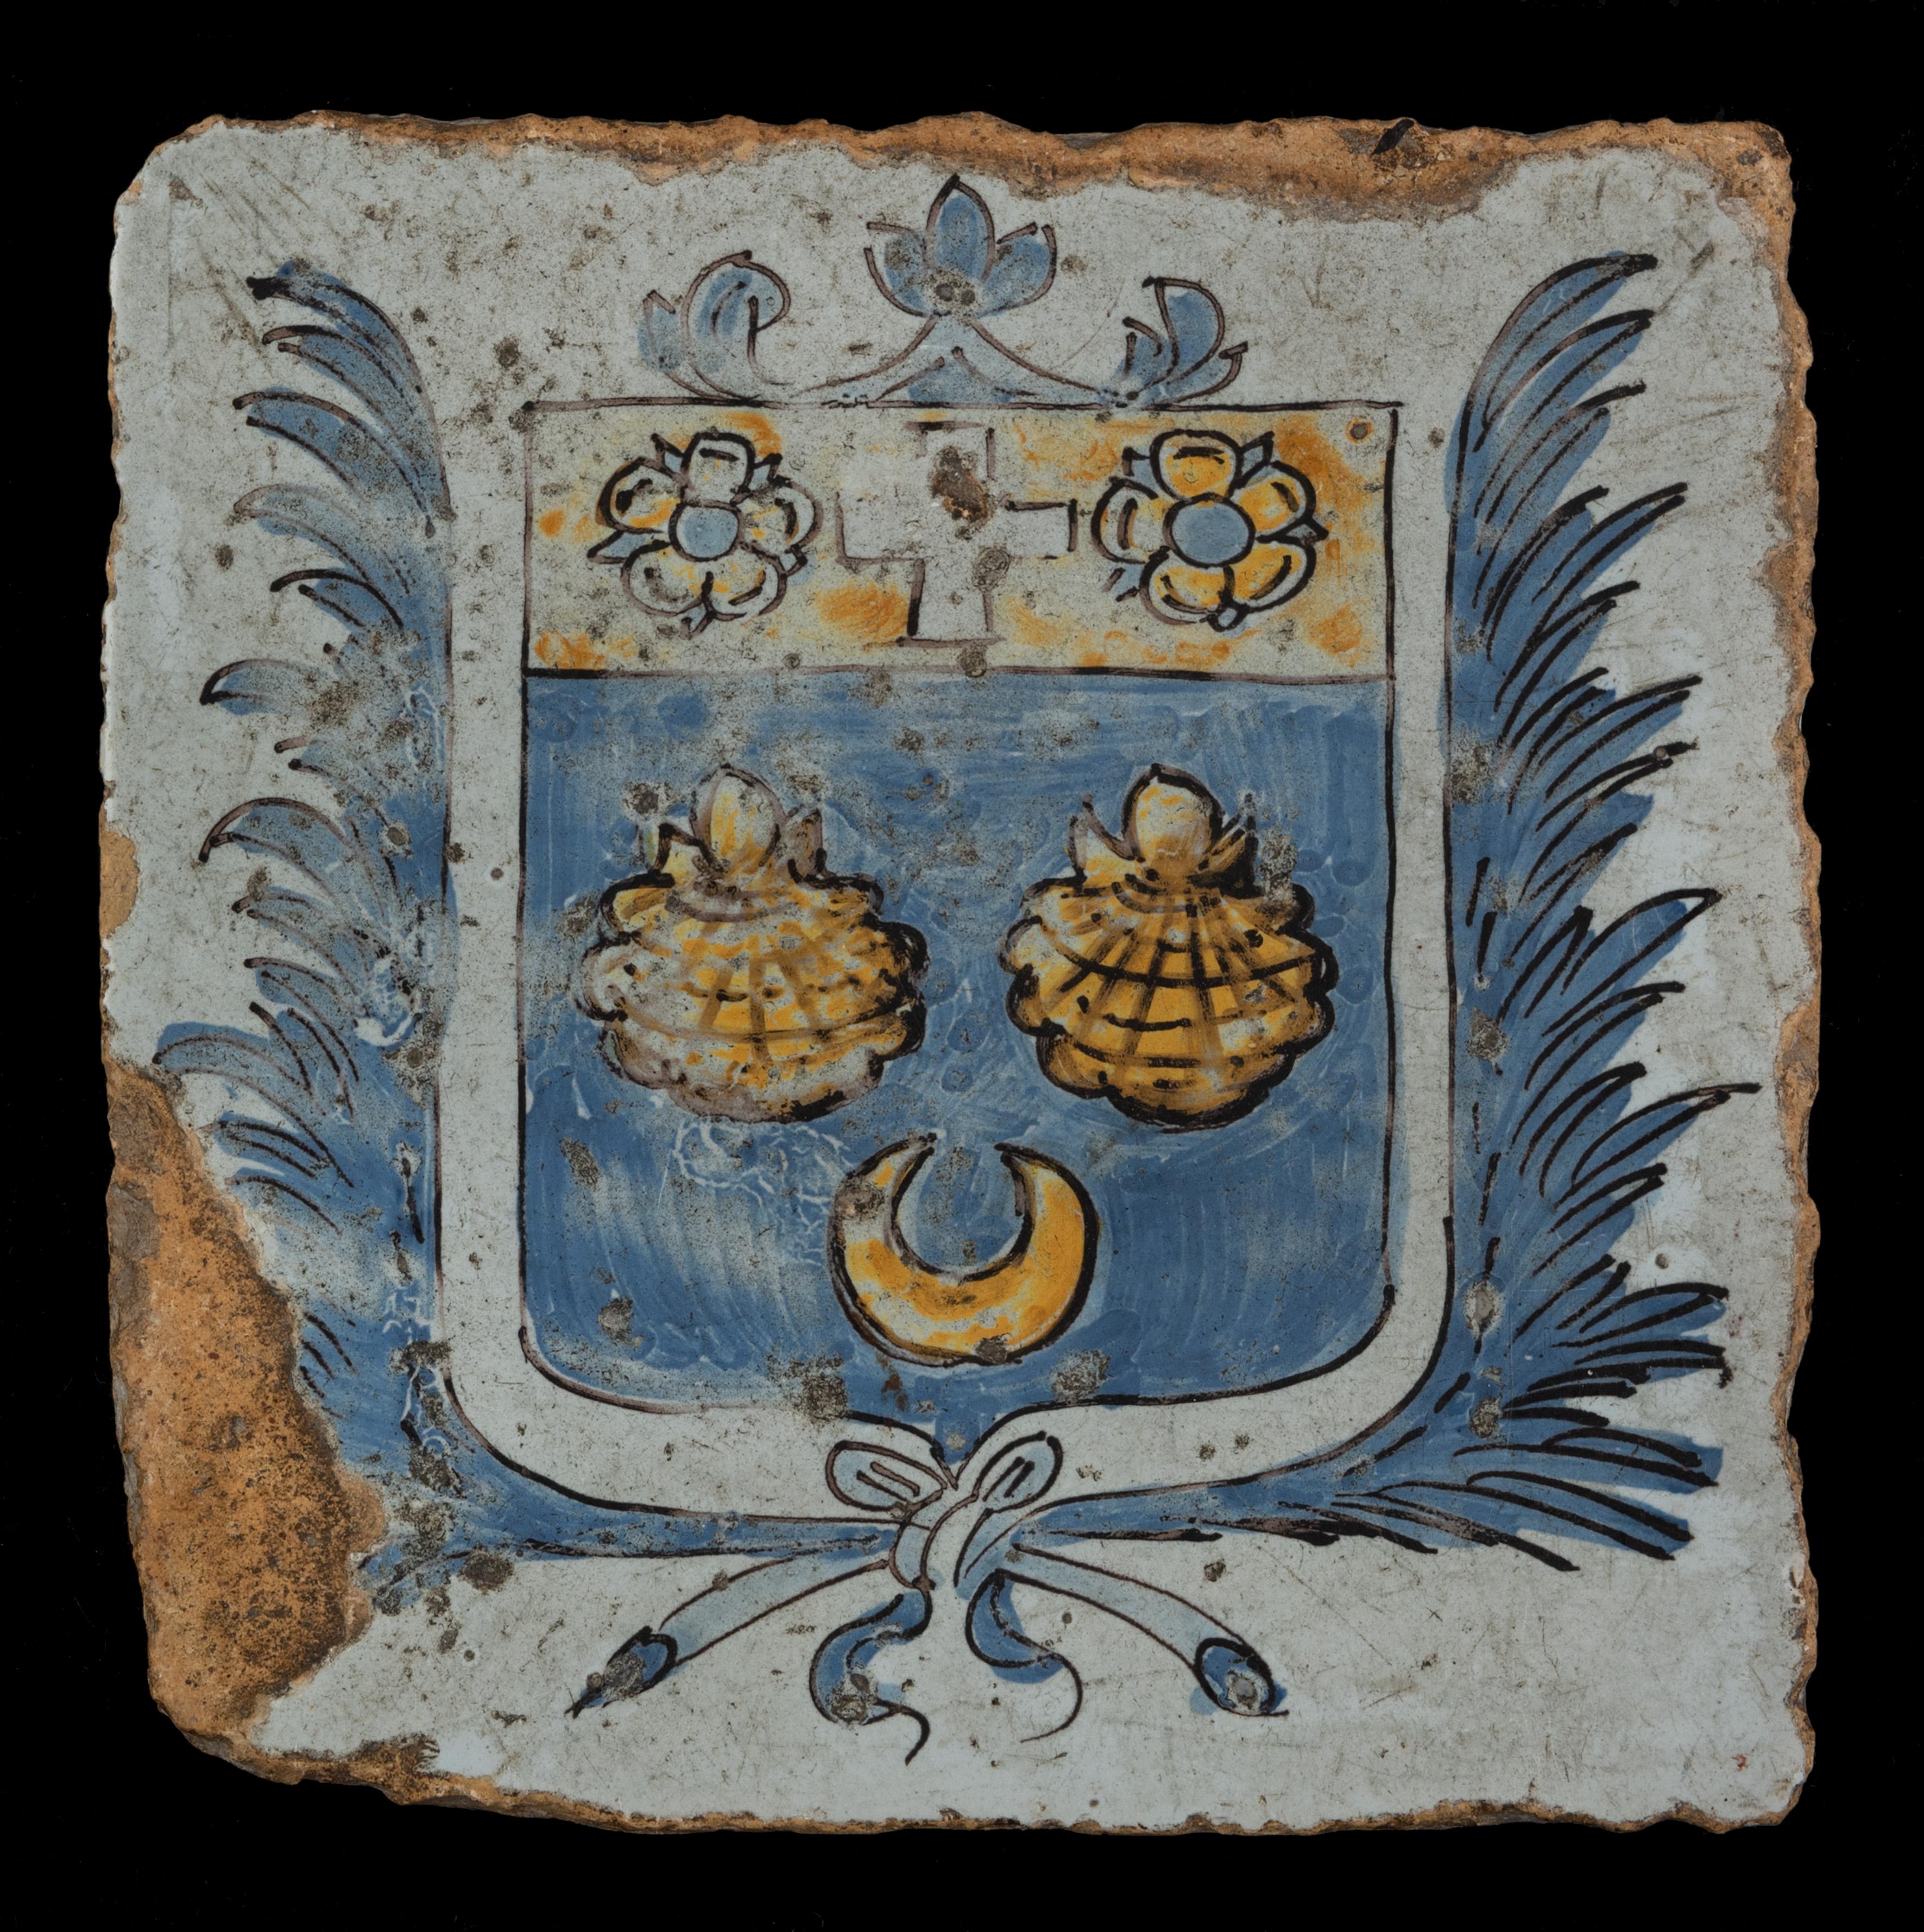 Rare Tin-glazed floor tile with the coat of arms of the Montesquieu family. This tile was made in Nevers, France, around 1650. An important member of this family was the French philosopher Charles Montesquieu (1689-1755). Spiritual father of the